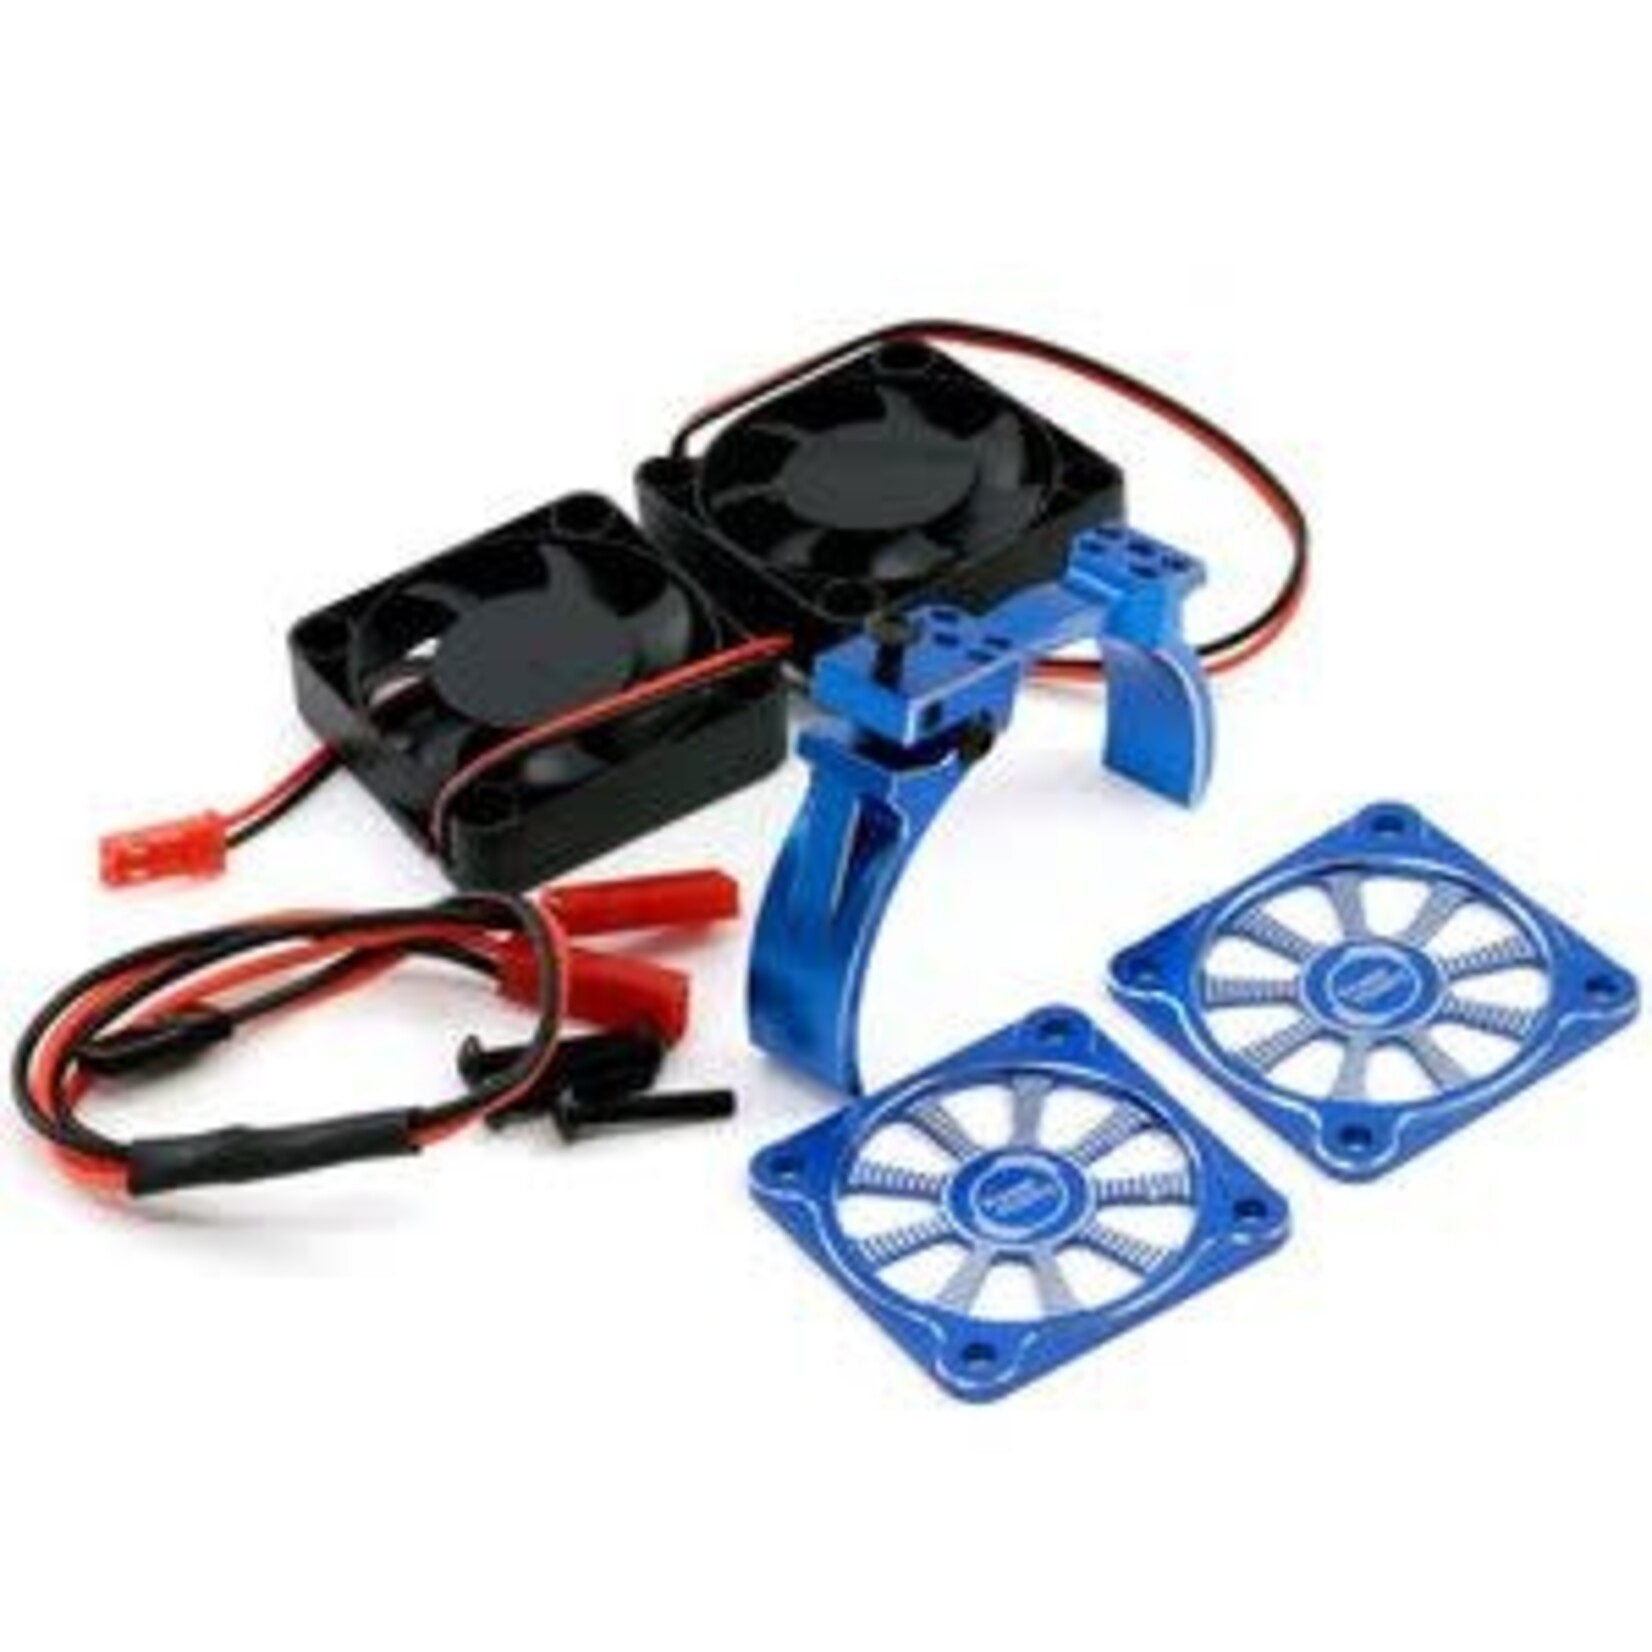 Powerhobby PH1293BLUE  1/8 Aluminum Heatsink 40mm Dual High Speed Cooling Fans with Cover, Blue